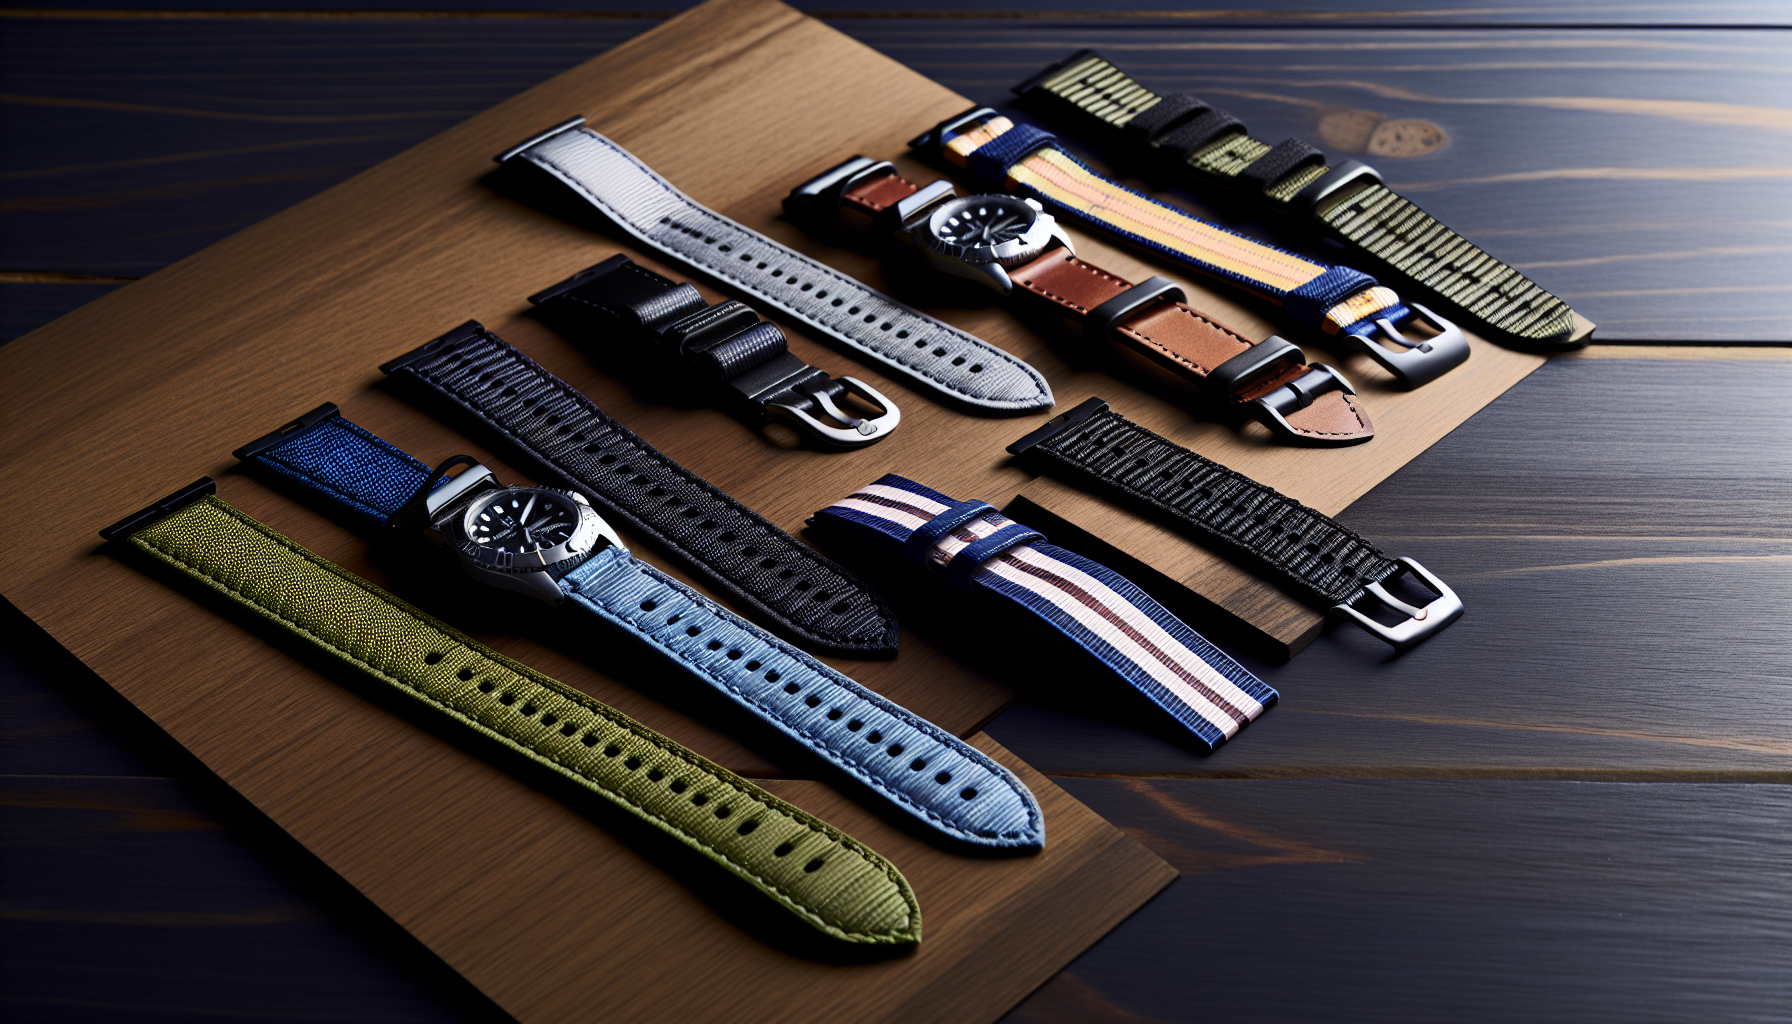 NATO straps in various colors and materials